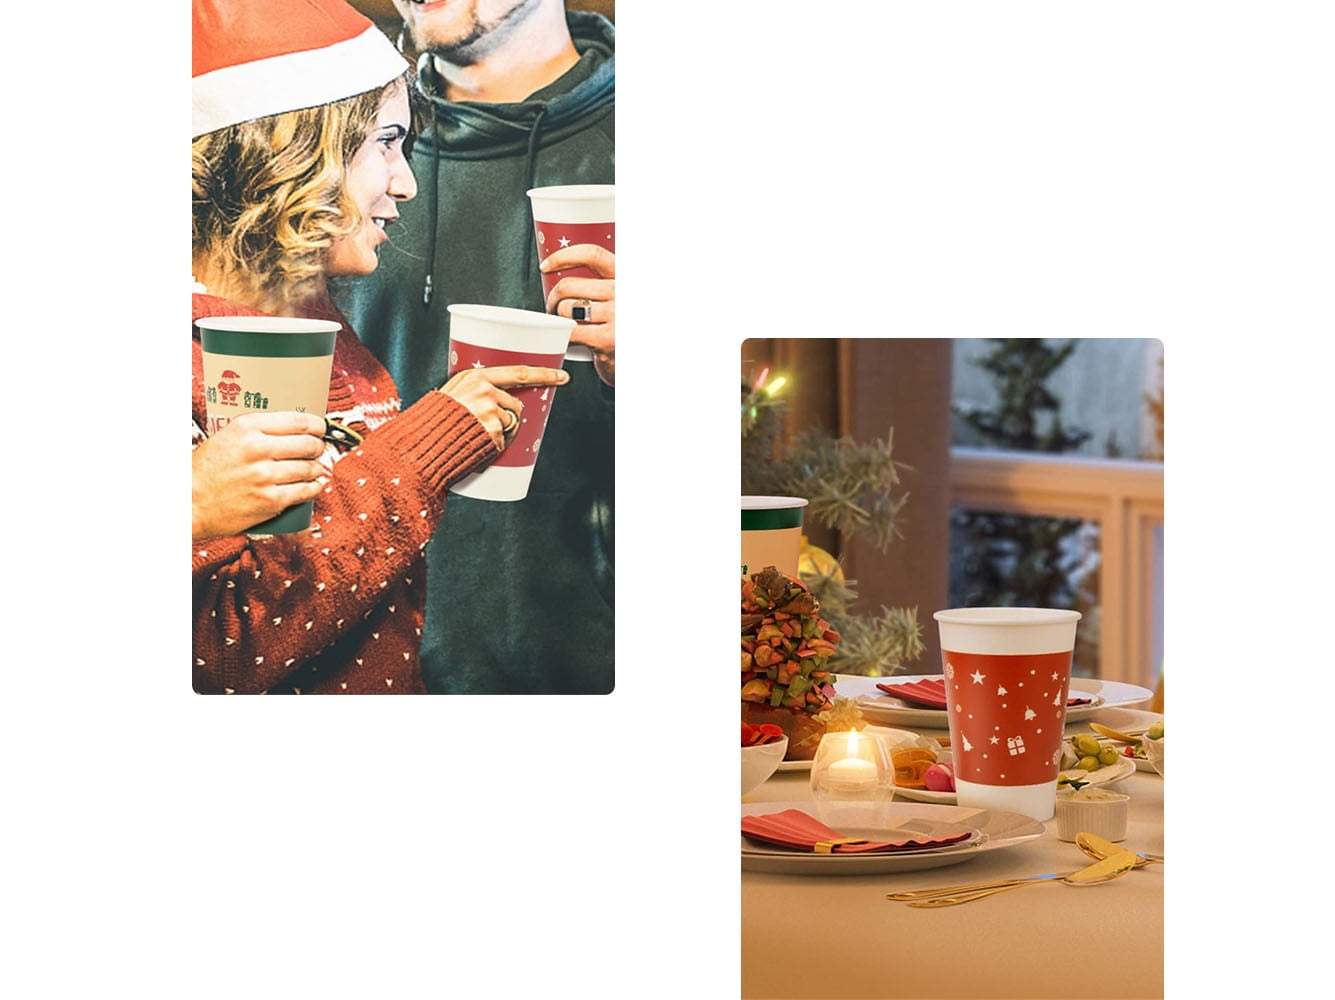 Bapmnicc 50 Pack Christmas Disposable Coffee Cups with Lids & Sleeves, To  Go Coffee Cups, Holiday Di…See more Bapmnicc 50 Pack Christmas Disposable